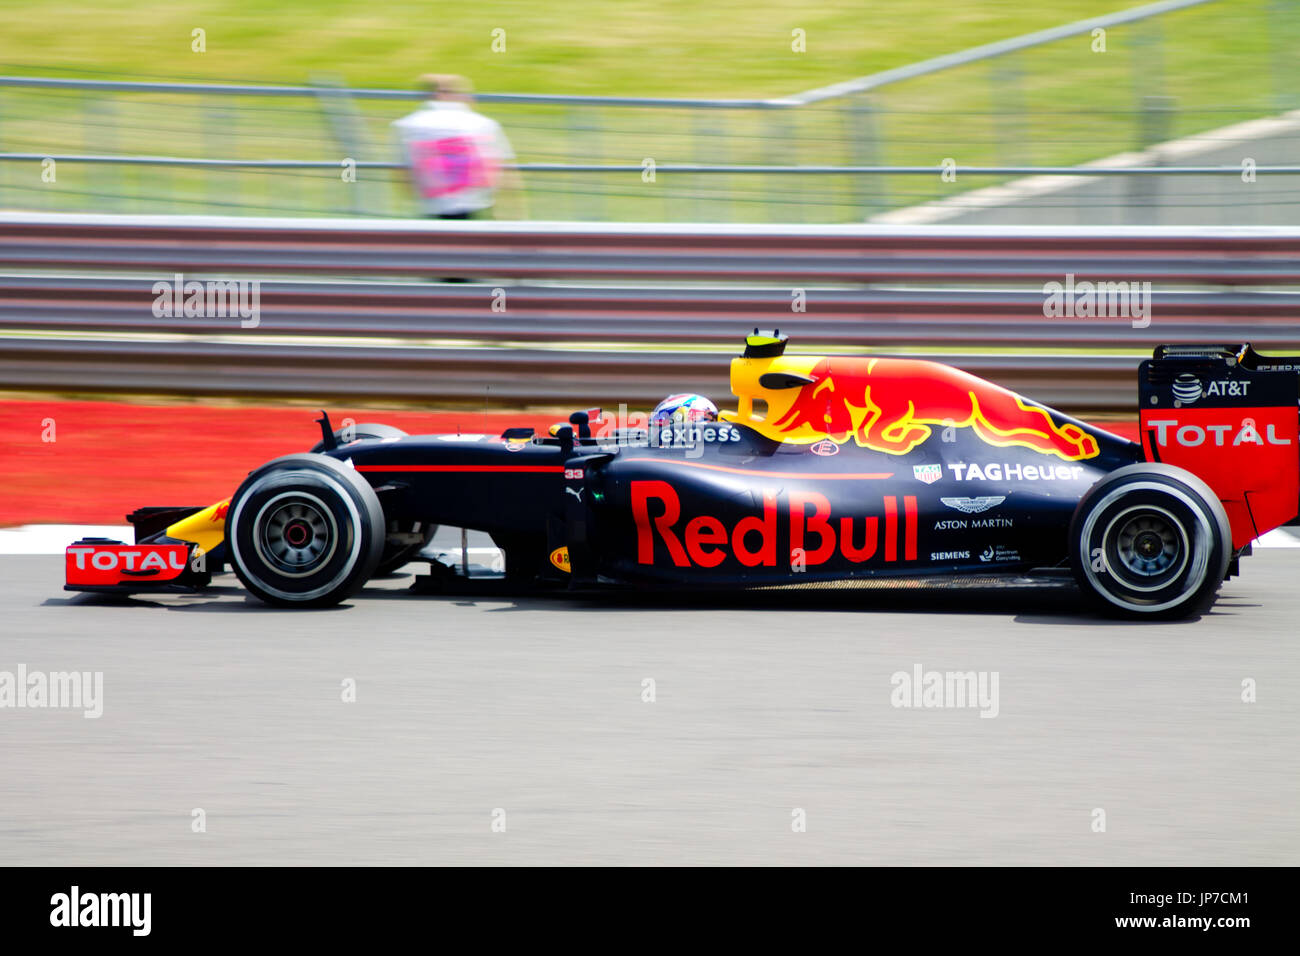 Red Bull at the the first corner of the Silverstone Grand Prix circuit during the 2016 British Formula 1 Grand Prix Stock Photo